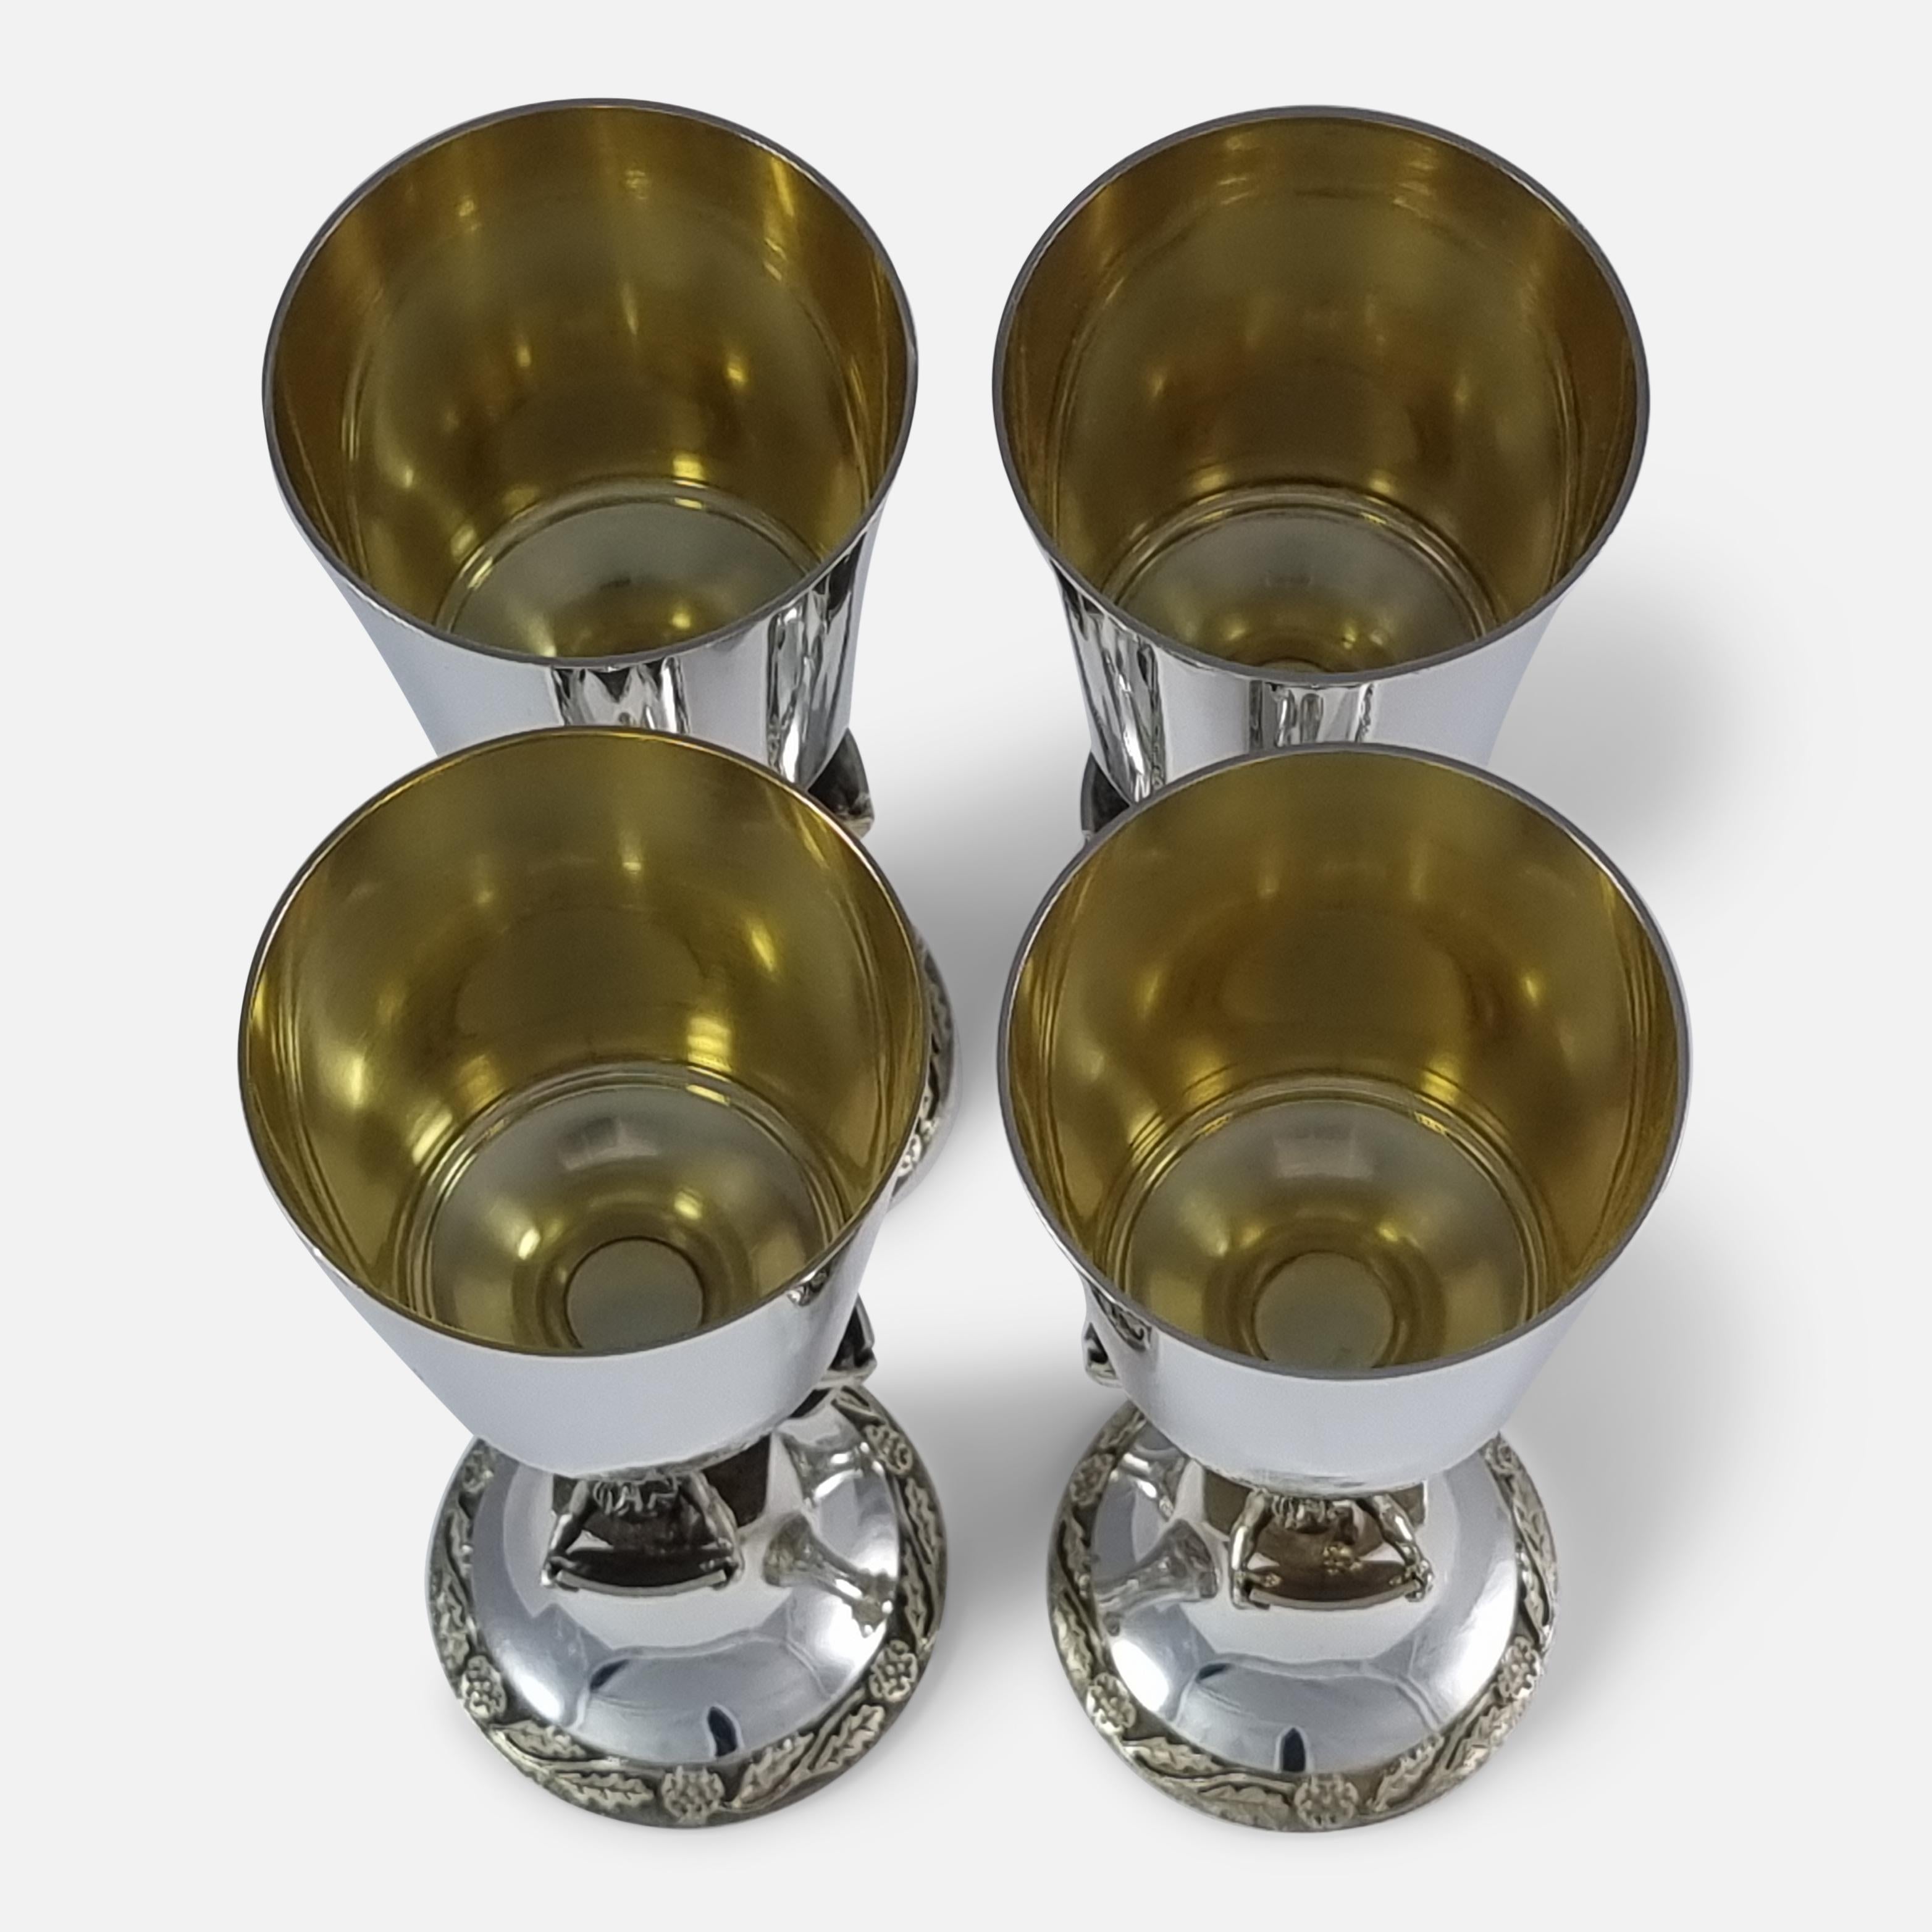 Set of Four Aurum Silver Gilt 'College of Arms' Goblets, Hector Miller, 1984 For Sale 3